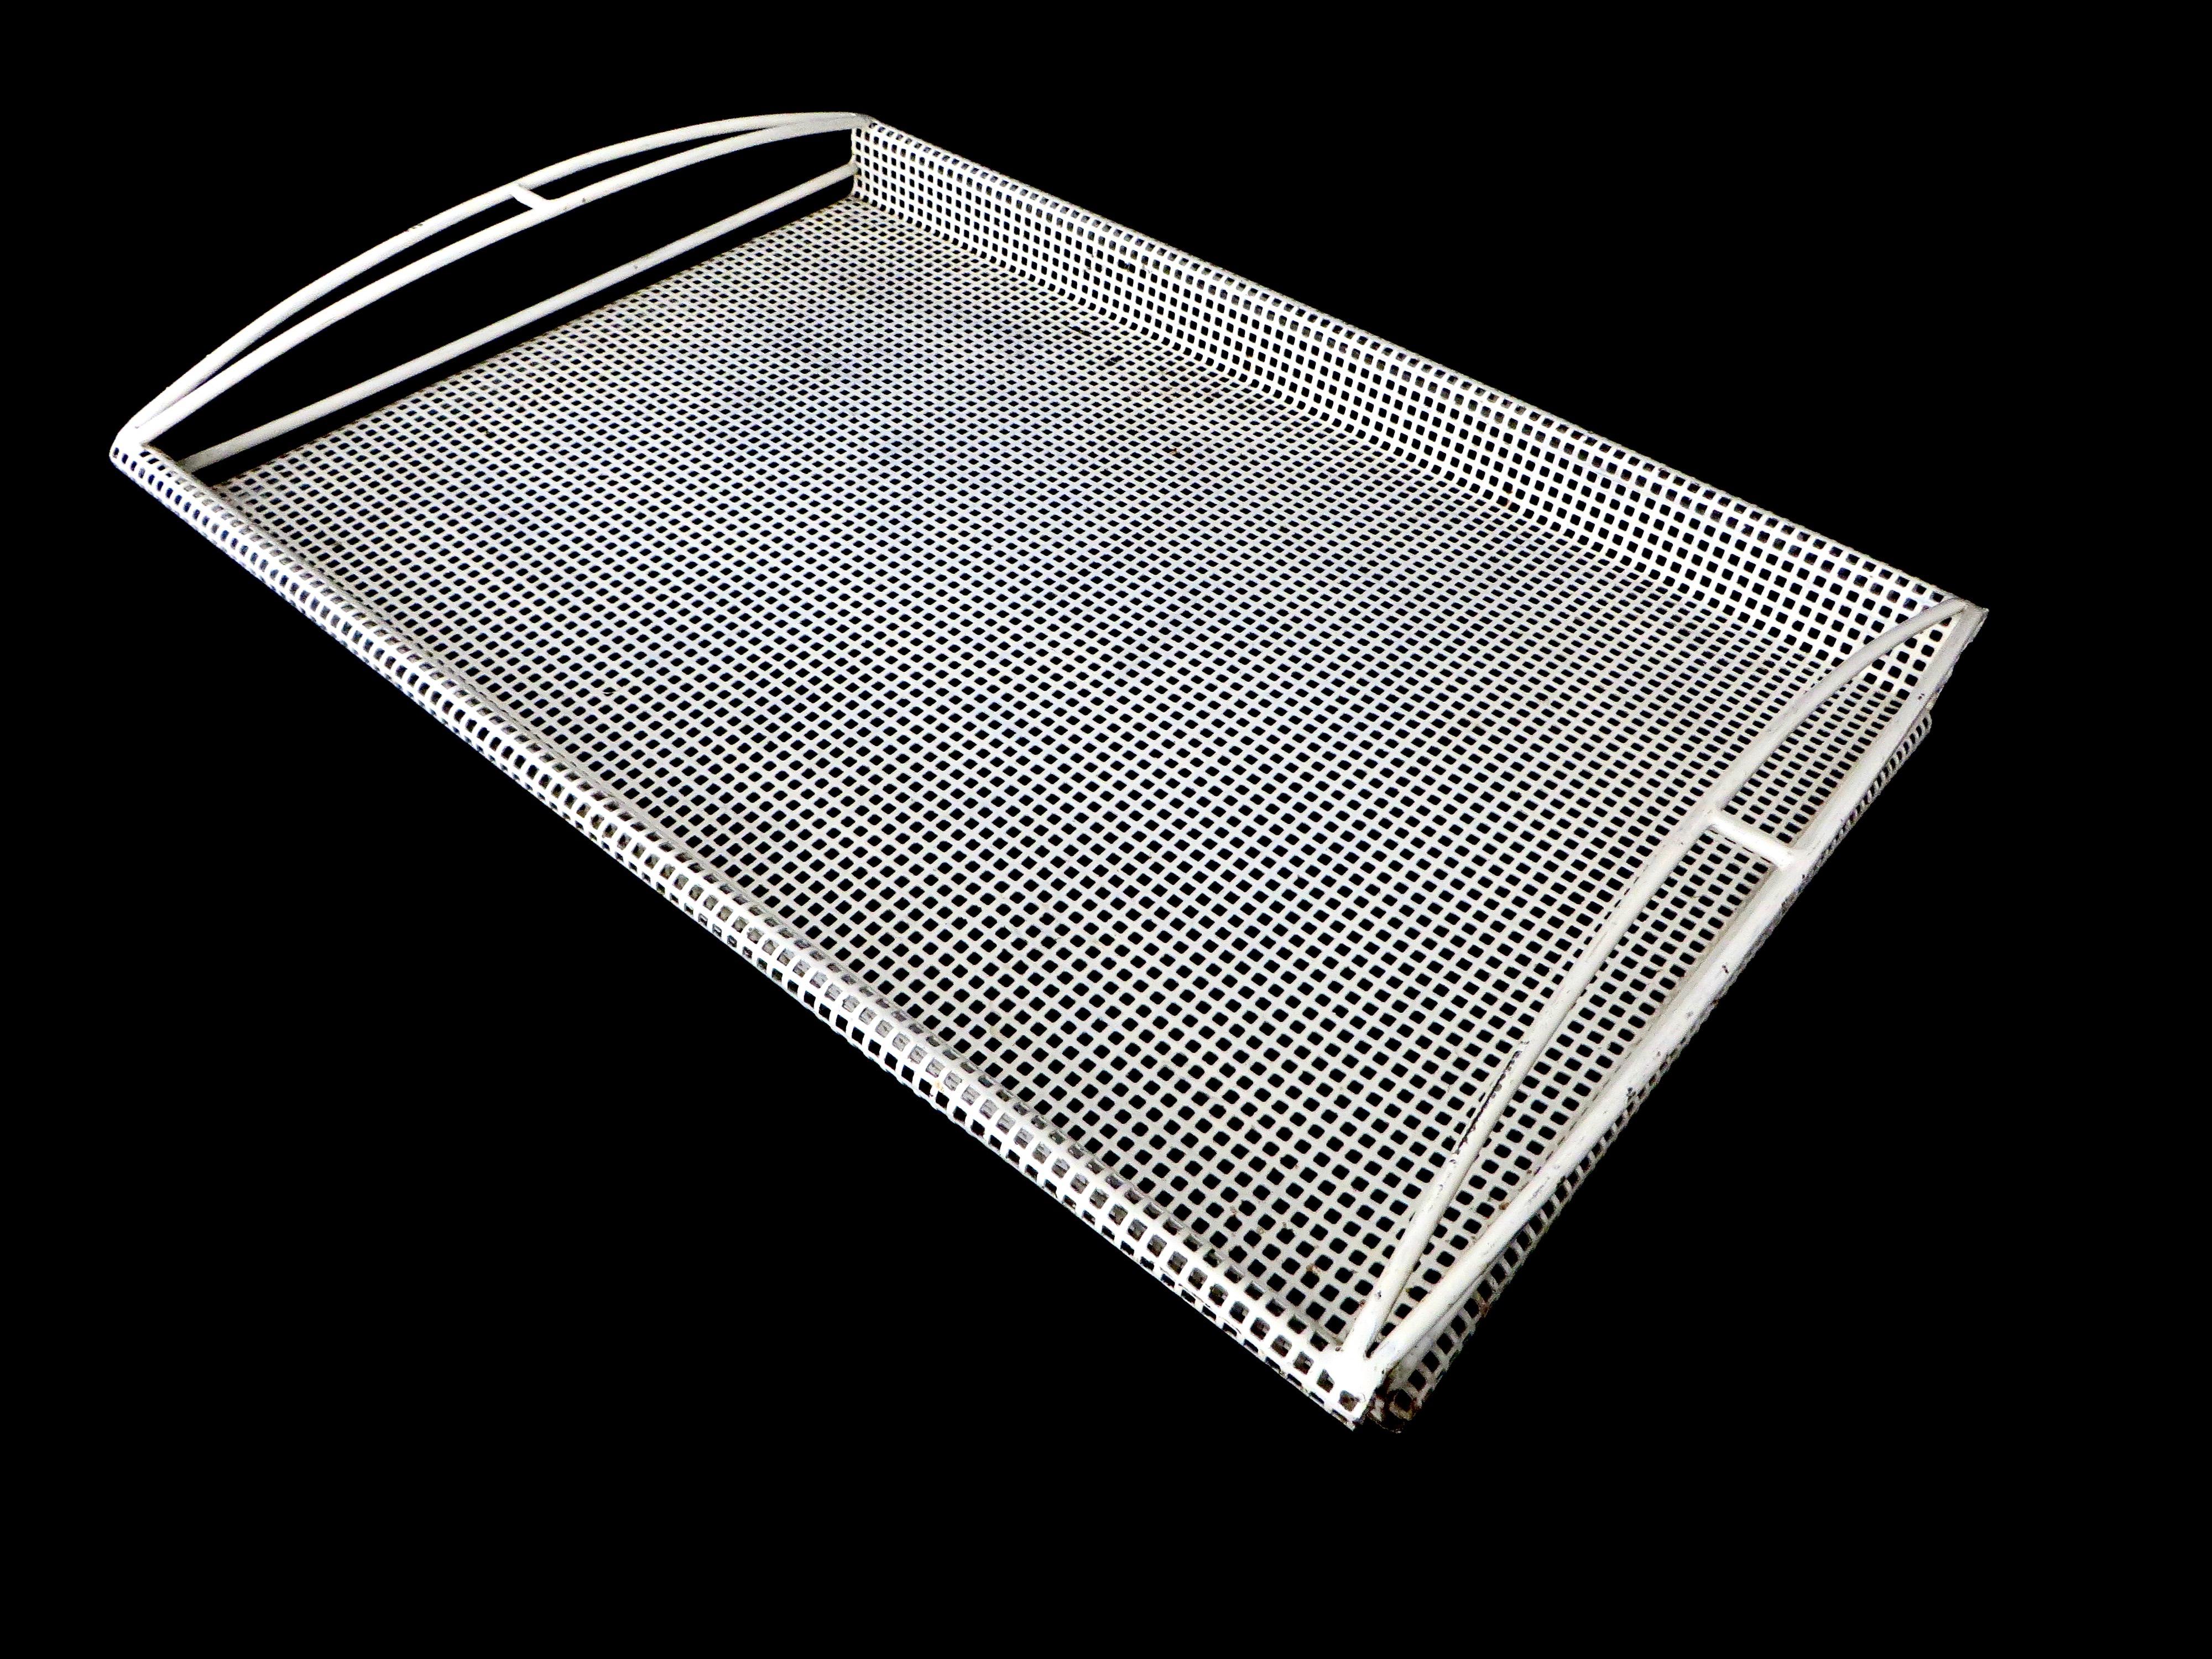 White metal tray, model Chamboard, designed by Mathieu Mategot, France, circa 1950.
Made of perforated sheet metal, a hole pattern on the tray, and two minimalistic handles. Manufactured in Ateliers Matégot, France, circa 1950.
The iconic